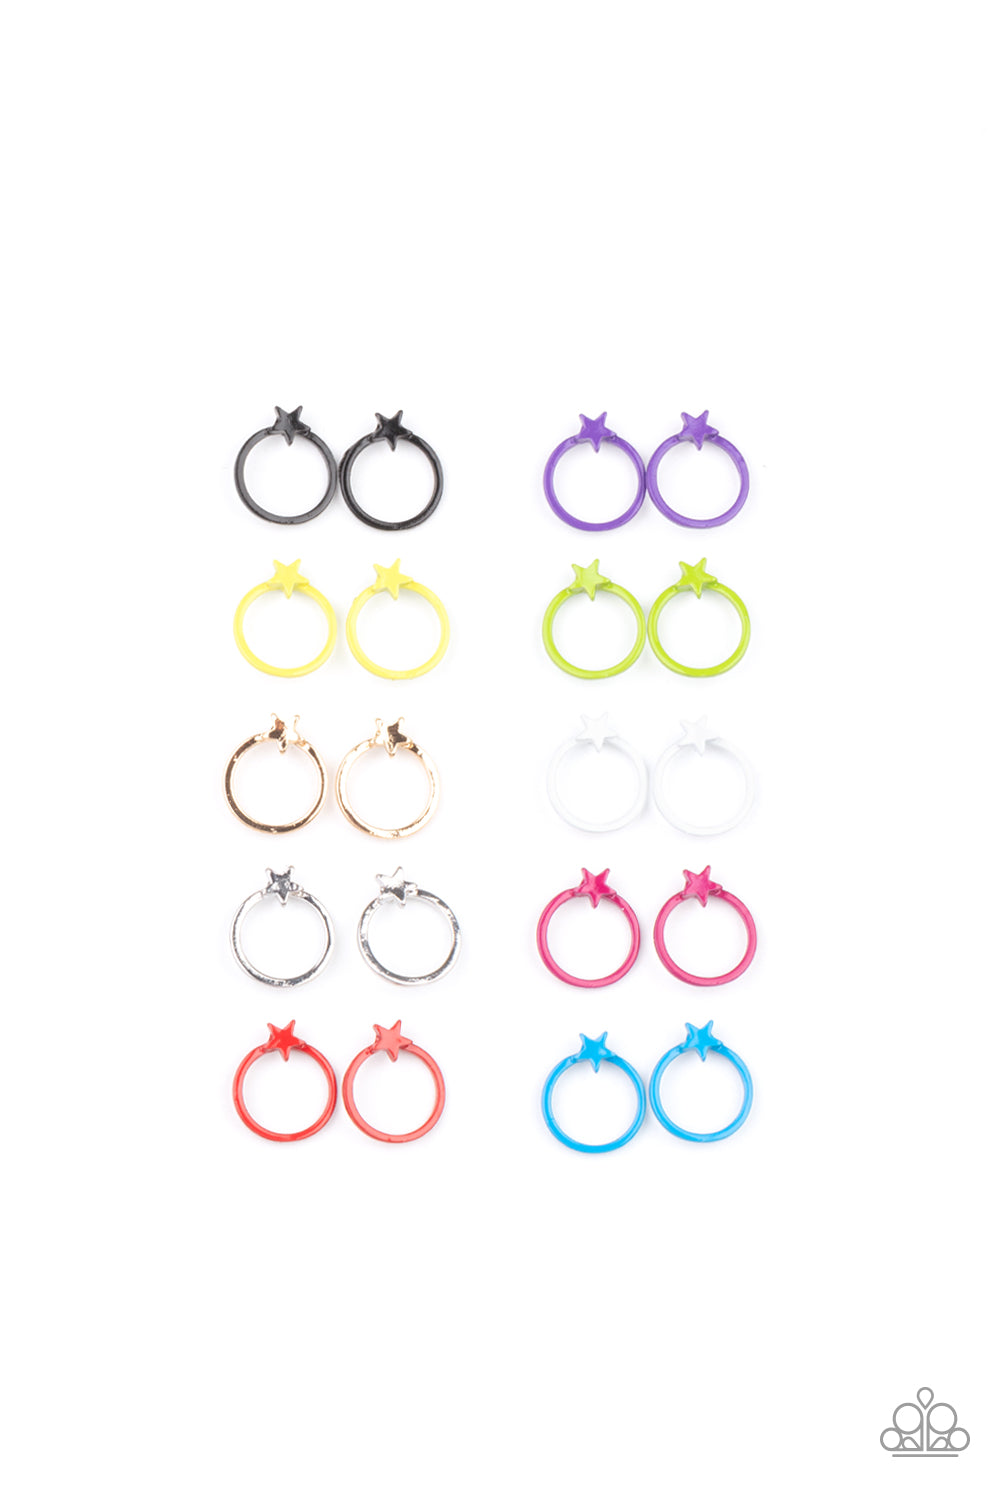 PRE-ORDER - Paparazzi Starlet Shimmer Earrings, 10 - Dainty Star Hoops in Black, Purple, Yellow, Green, Gold, White, Silver, Pink, Red & Blue - $5 Jewelry with Ashley Swint